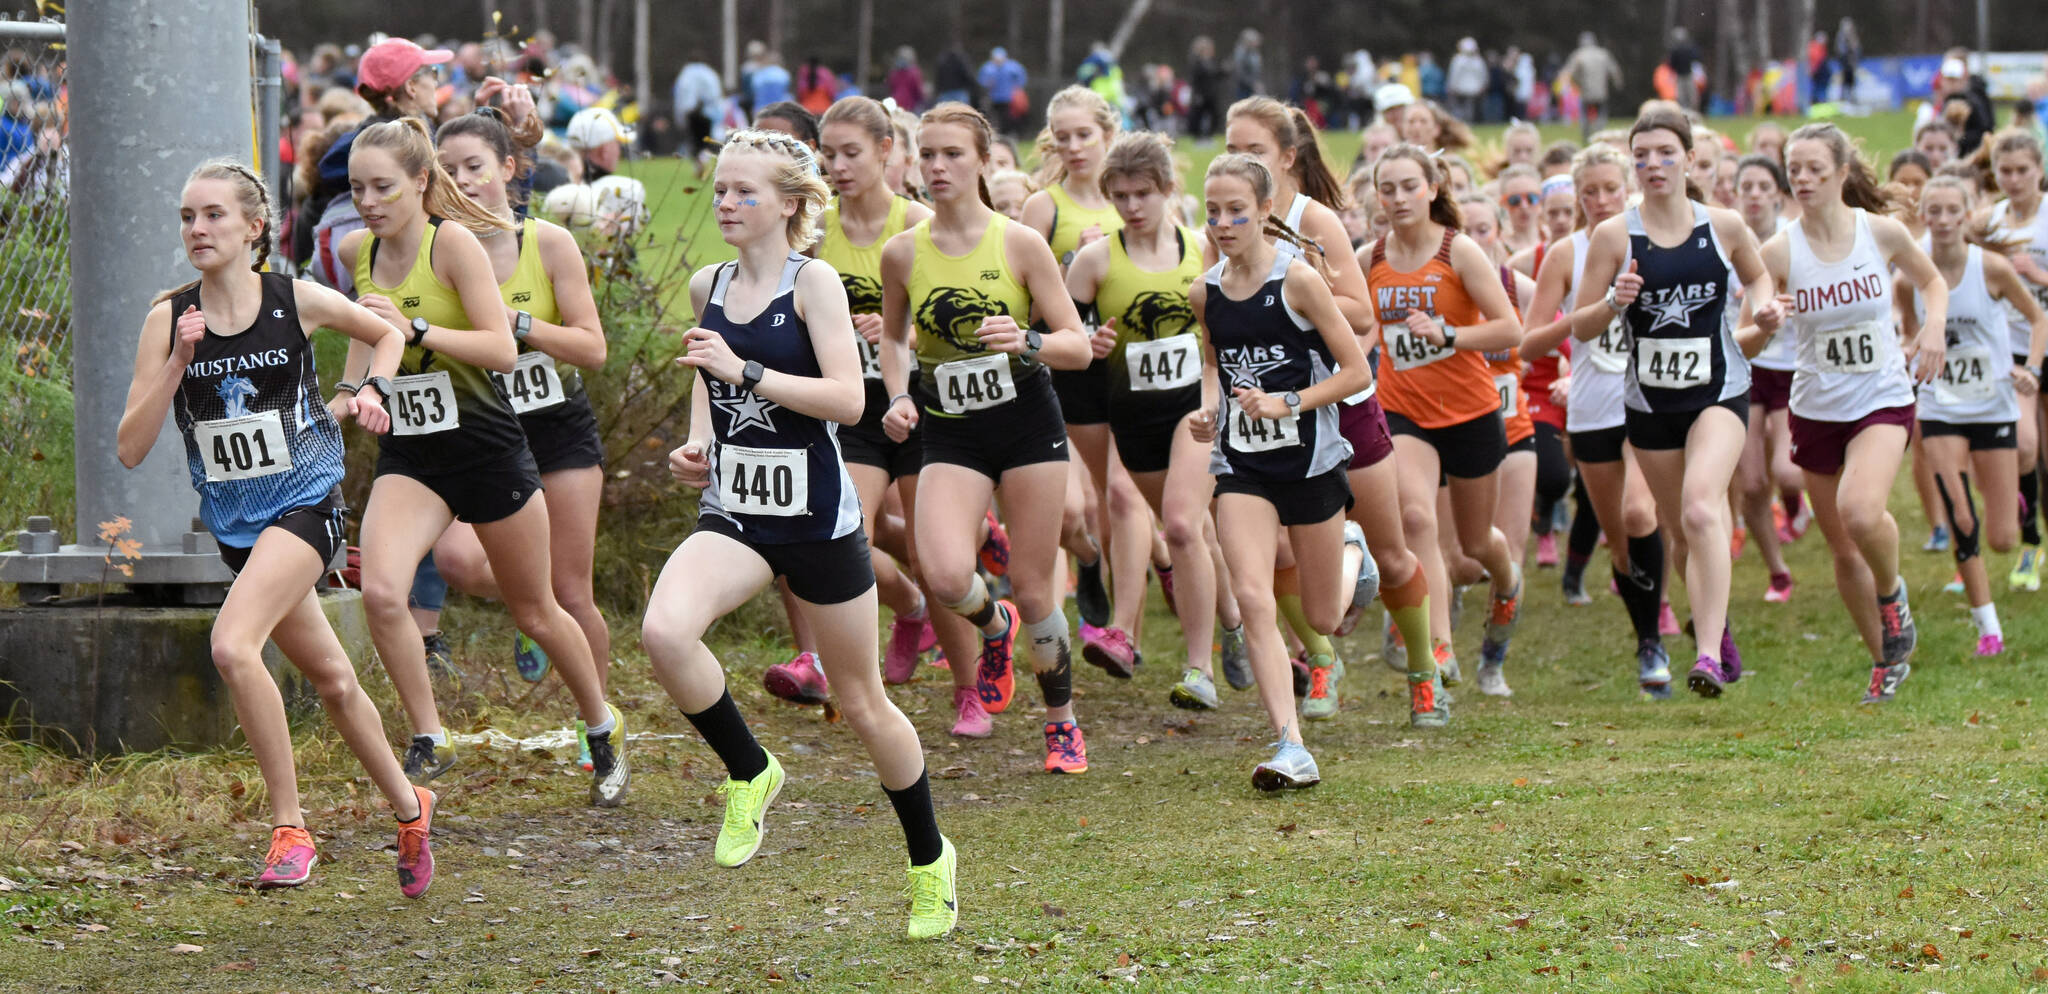 Chugiak’s Campbell Peterson and Soldotna’s Sophia Jedlicki lead the Division I girls race at the state cross-country meet Saturday, Oct. 8, 2022, at Bartlett High School in Anchorage, Alaska. (Photo by Jeff Helminiak/Peninsula Clarion)